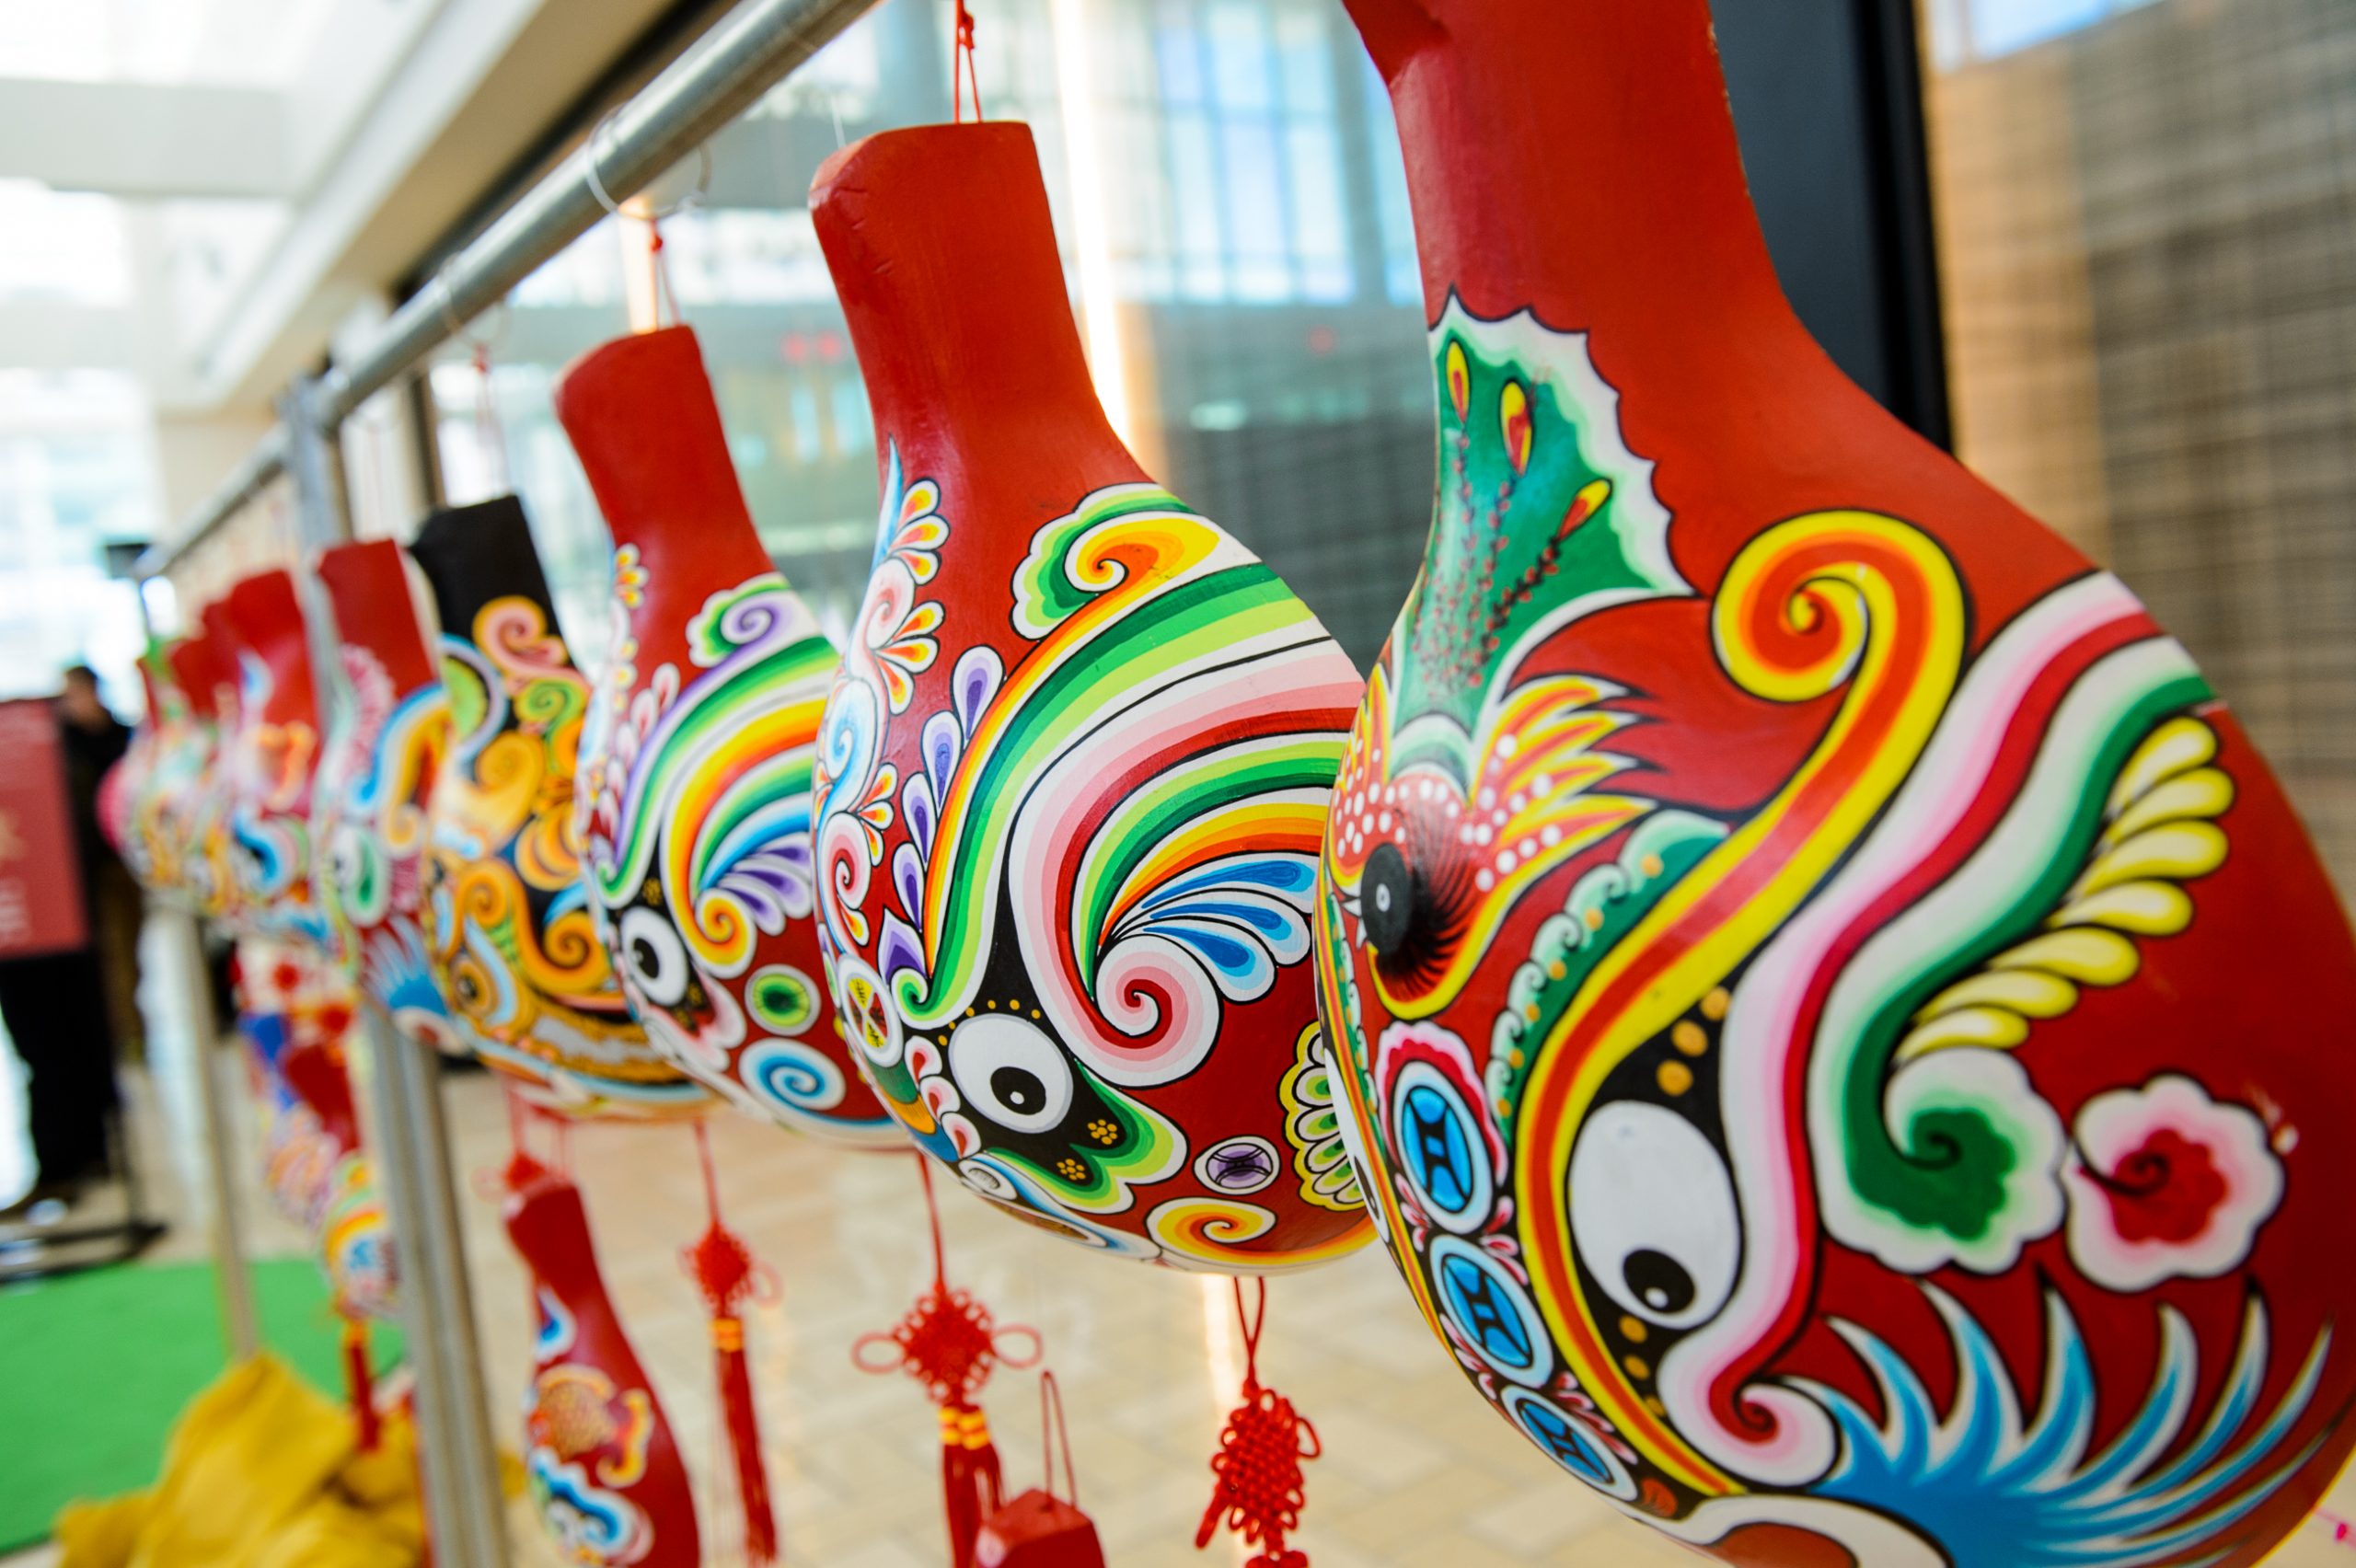 Decorations at Lunar New Year celebration at the Concourse in Tysons Corner Center